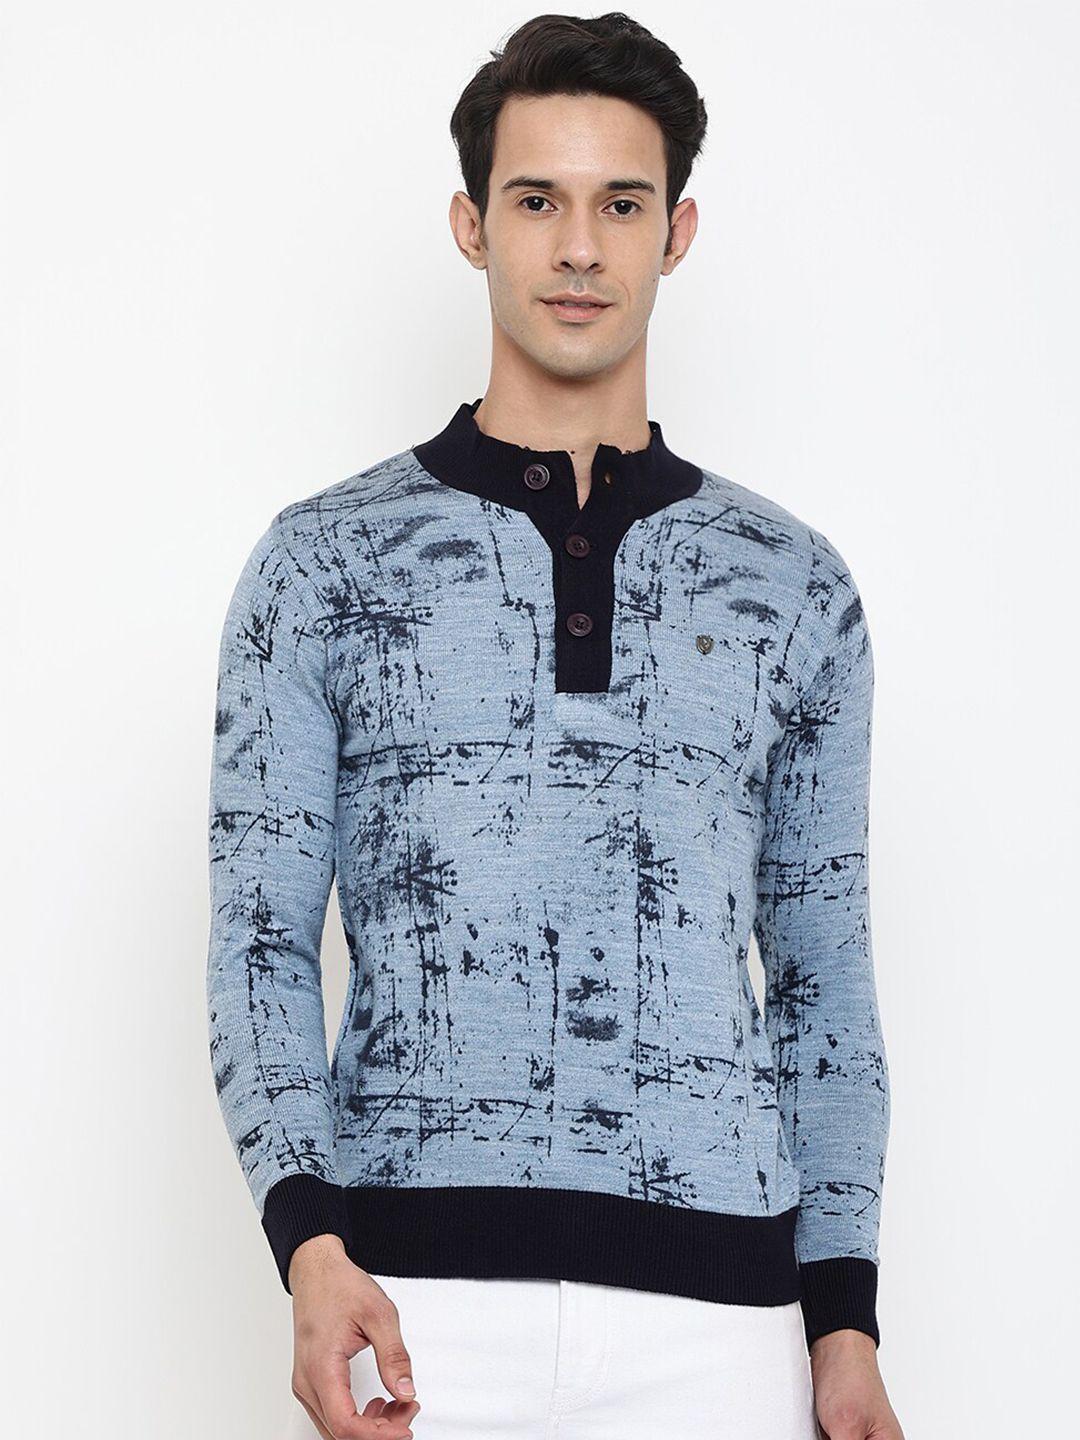 cantabil-men-turquoise-blue-&-black-abstract-printed-wool-pullover